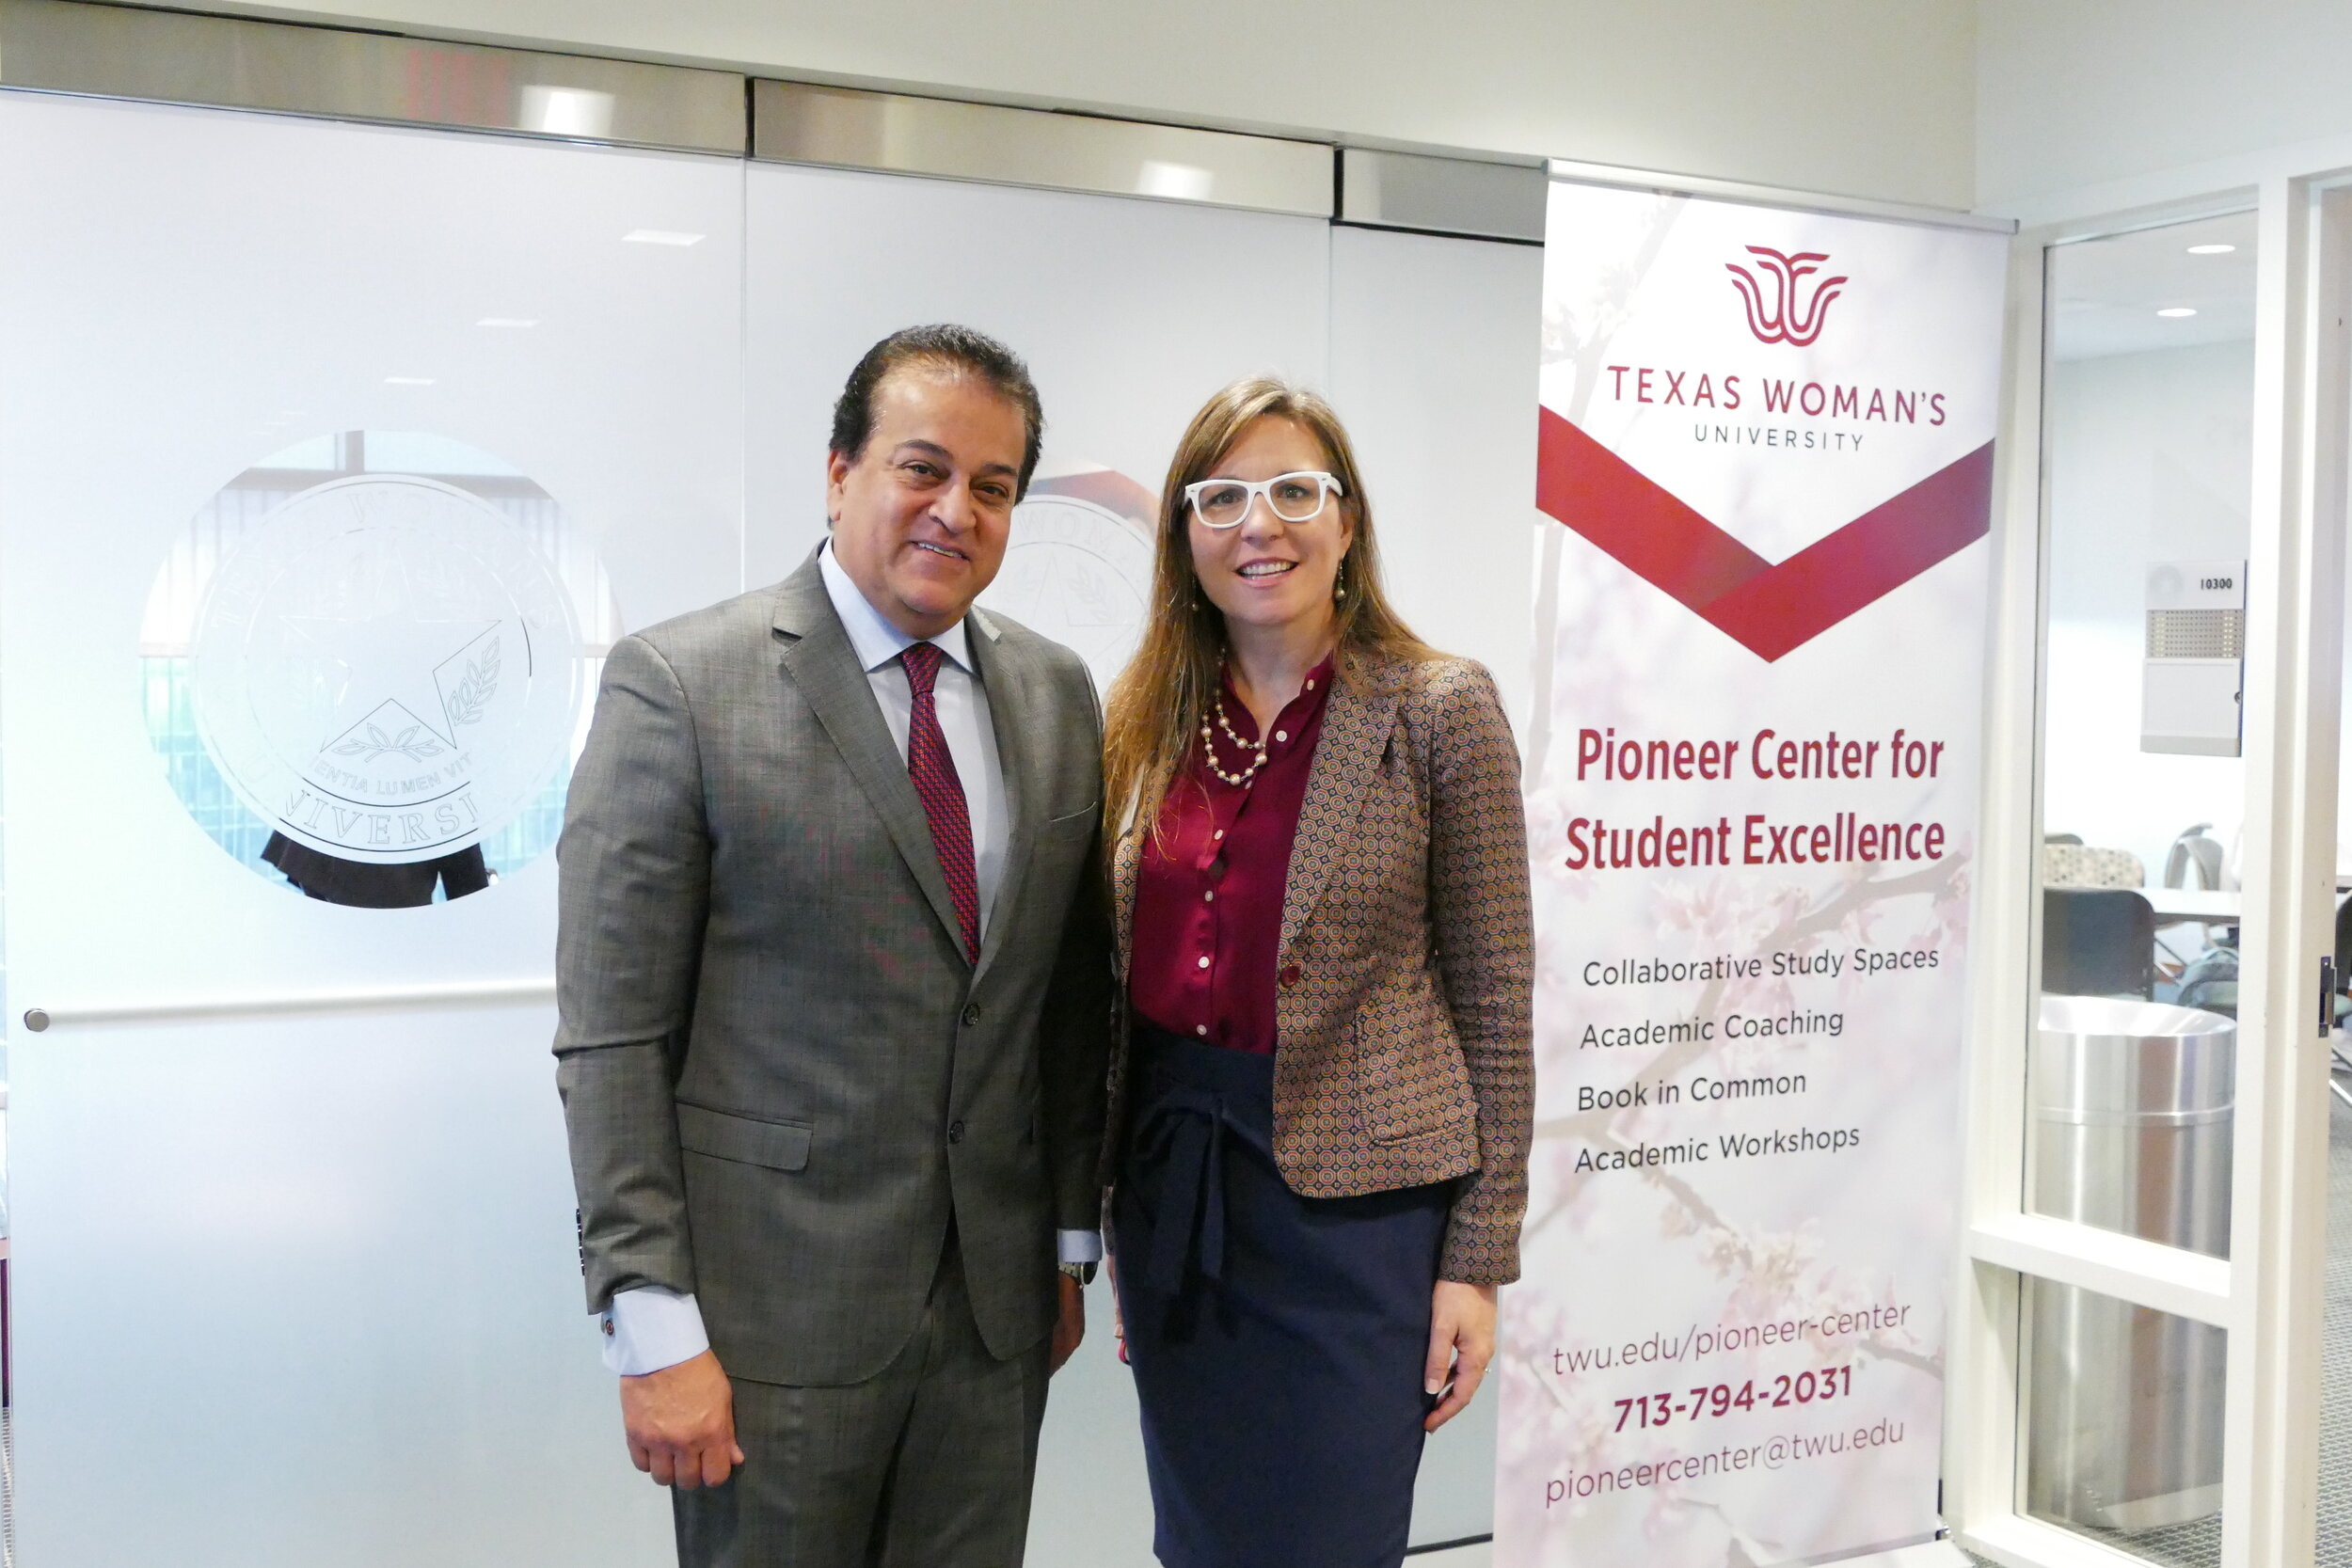 <a href='http://www.rossholmberg.com'>BWIN</a> and Texas Woman’s University host the Egyptian Minister of Higher Education visit to Texas.